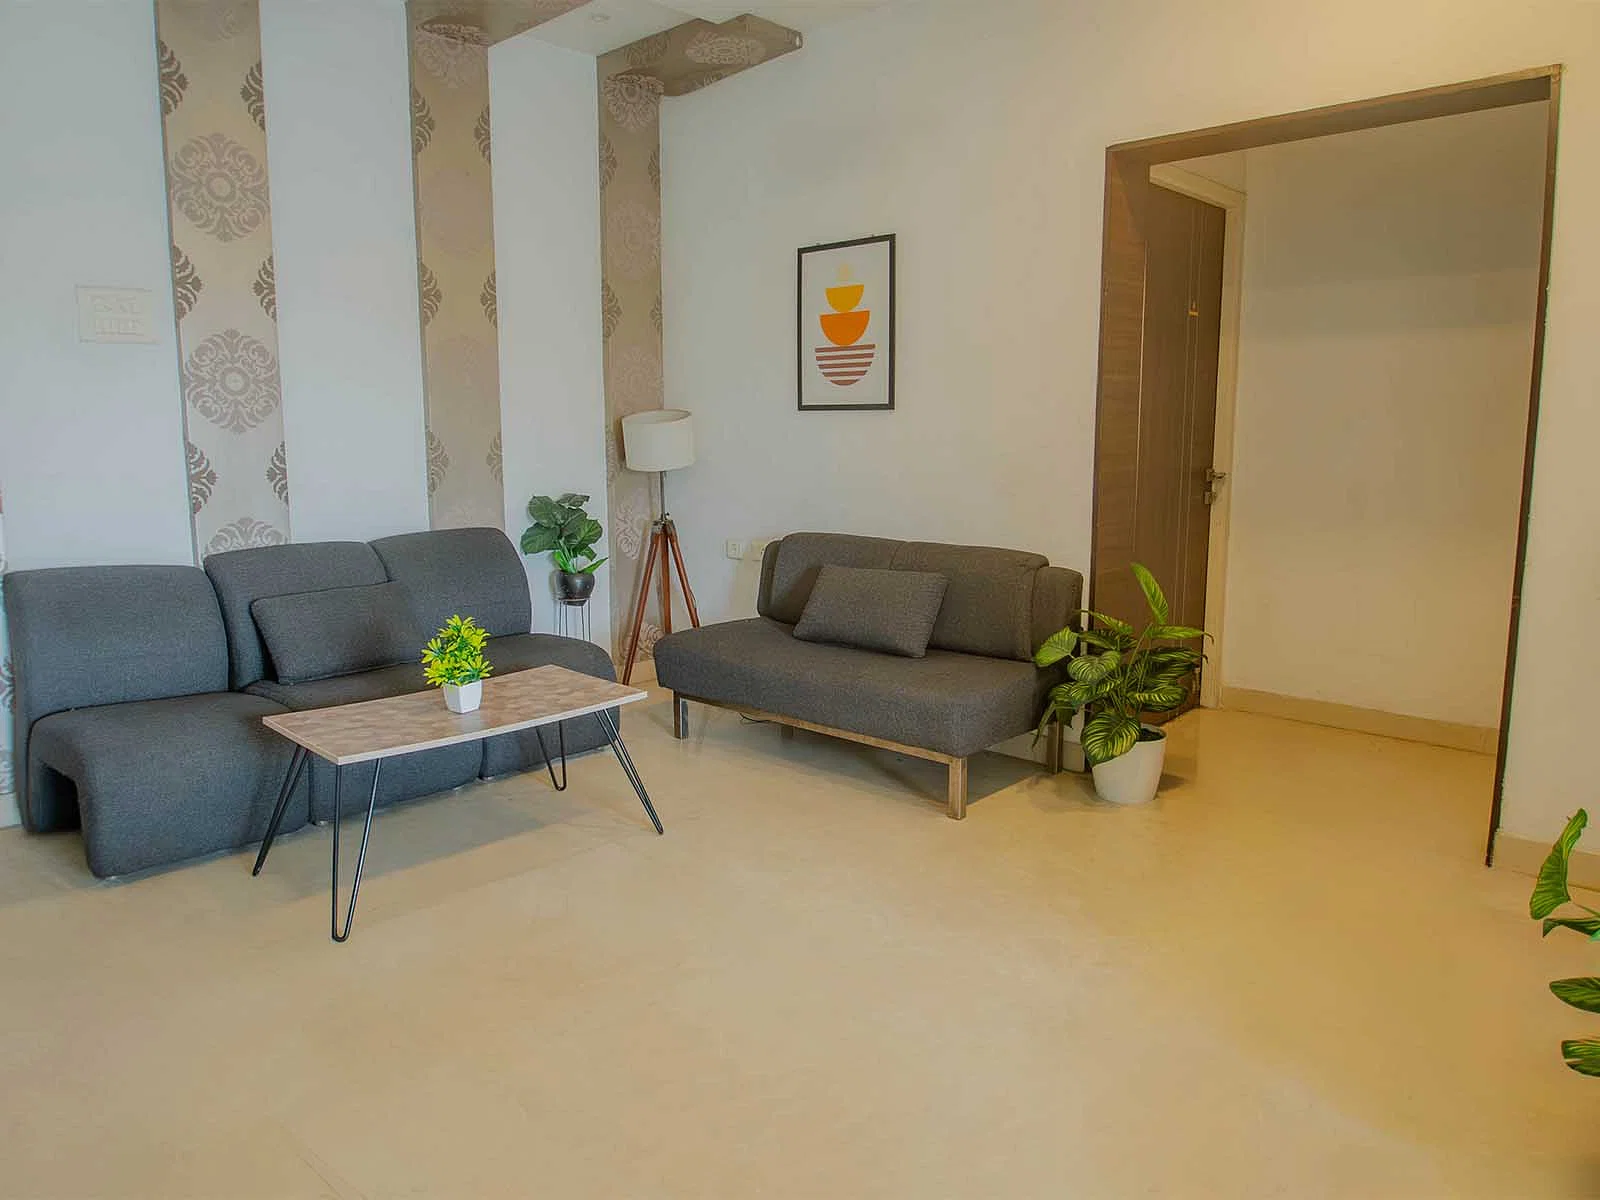 luxury PG accommodations with modern Wi-Fi, AC, and TV in C I T Nagar-Chennai-Zolo Bricklane